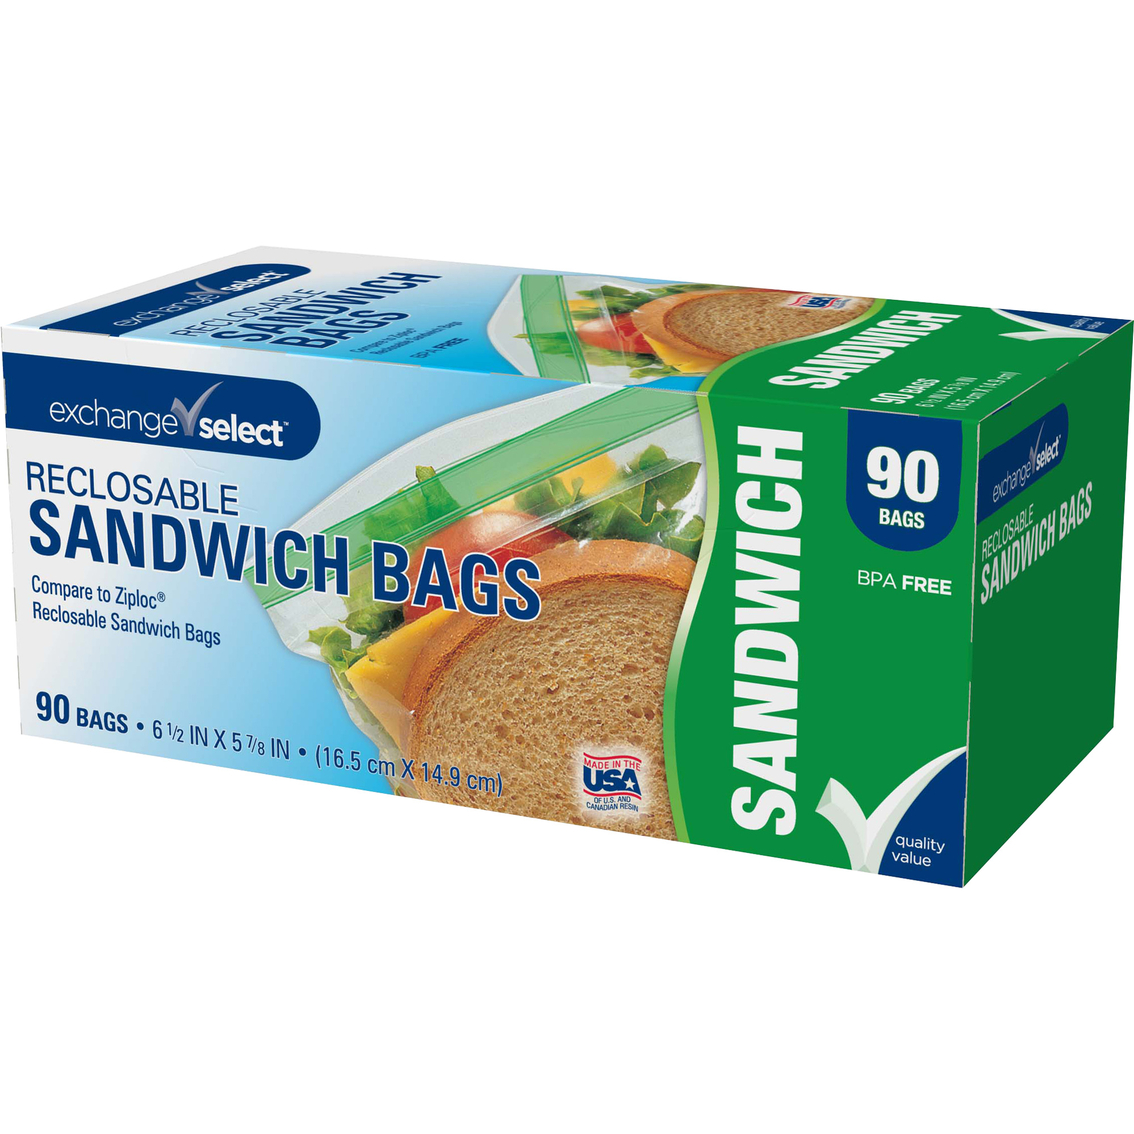 Exchange Select Reclosable Sandwich Bags 90 ct. - Image 2 of 4